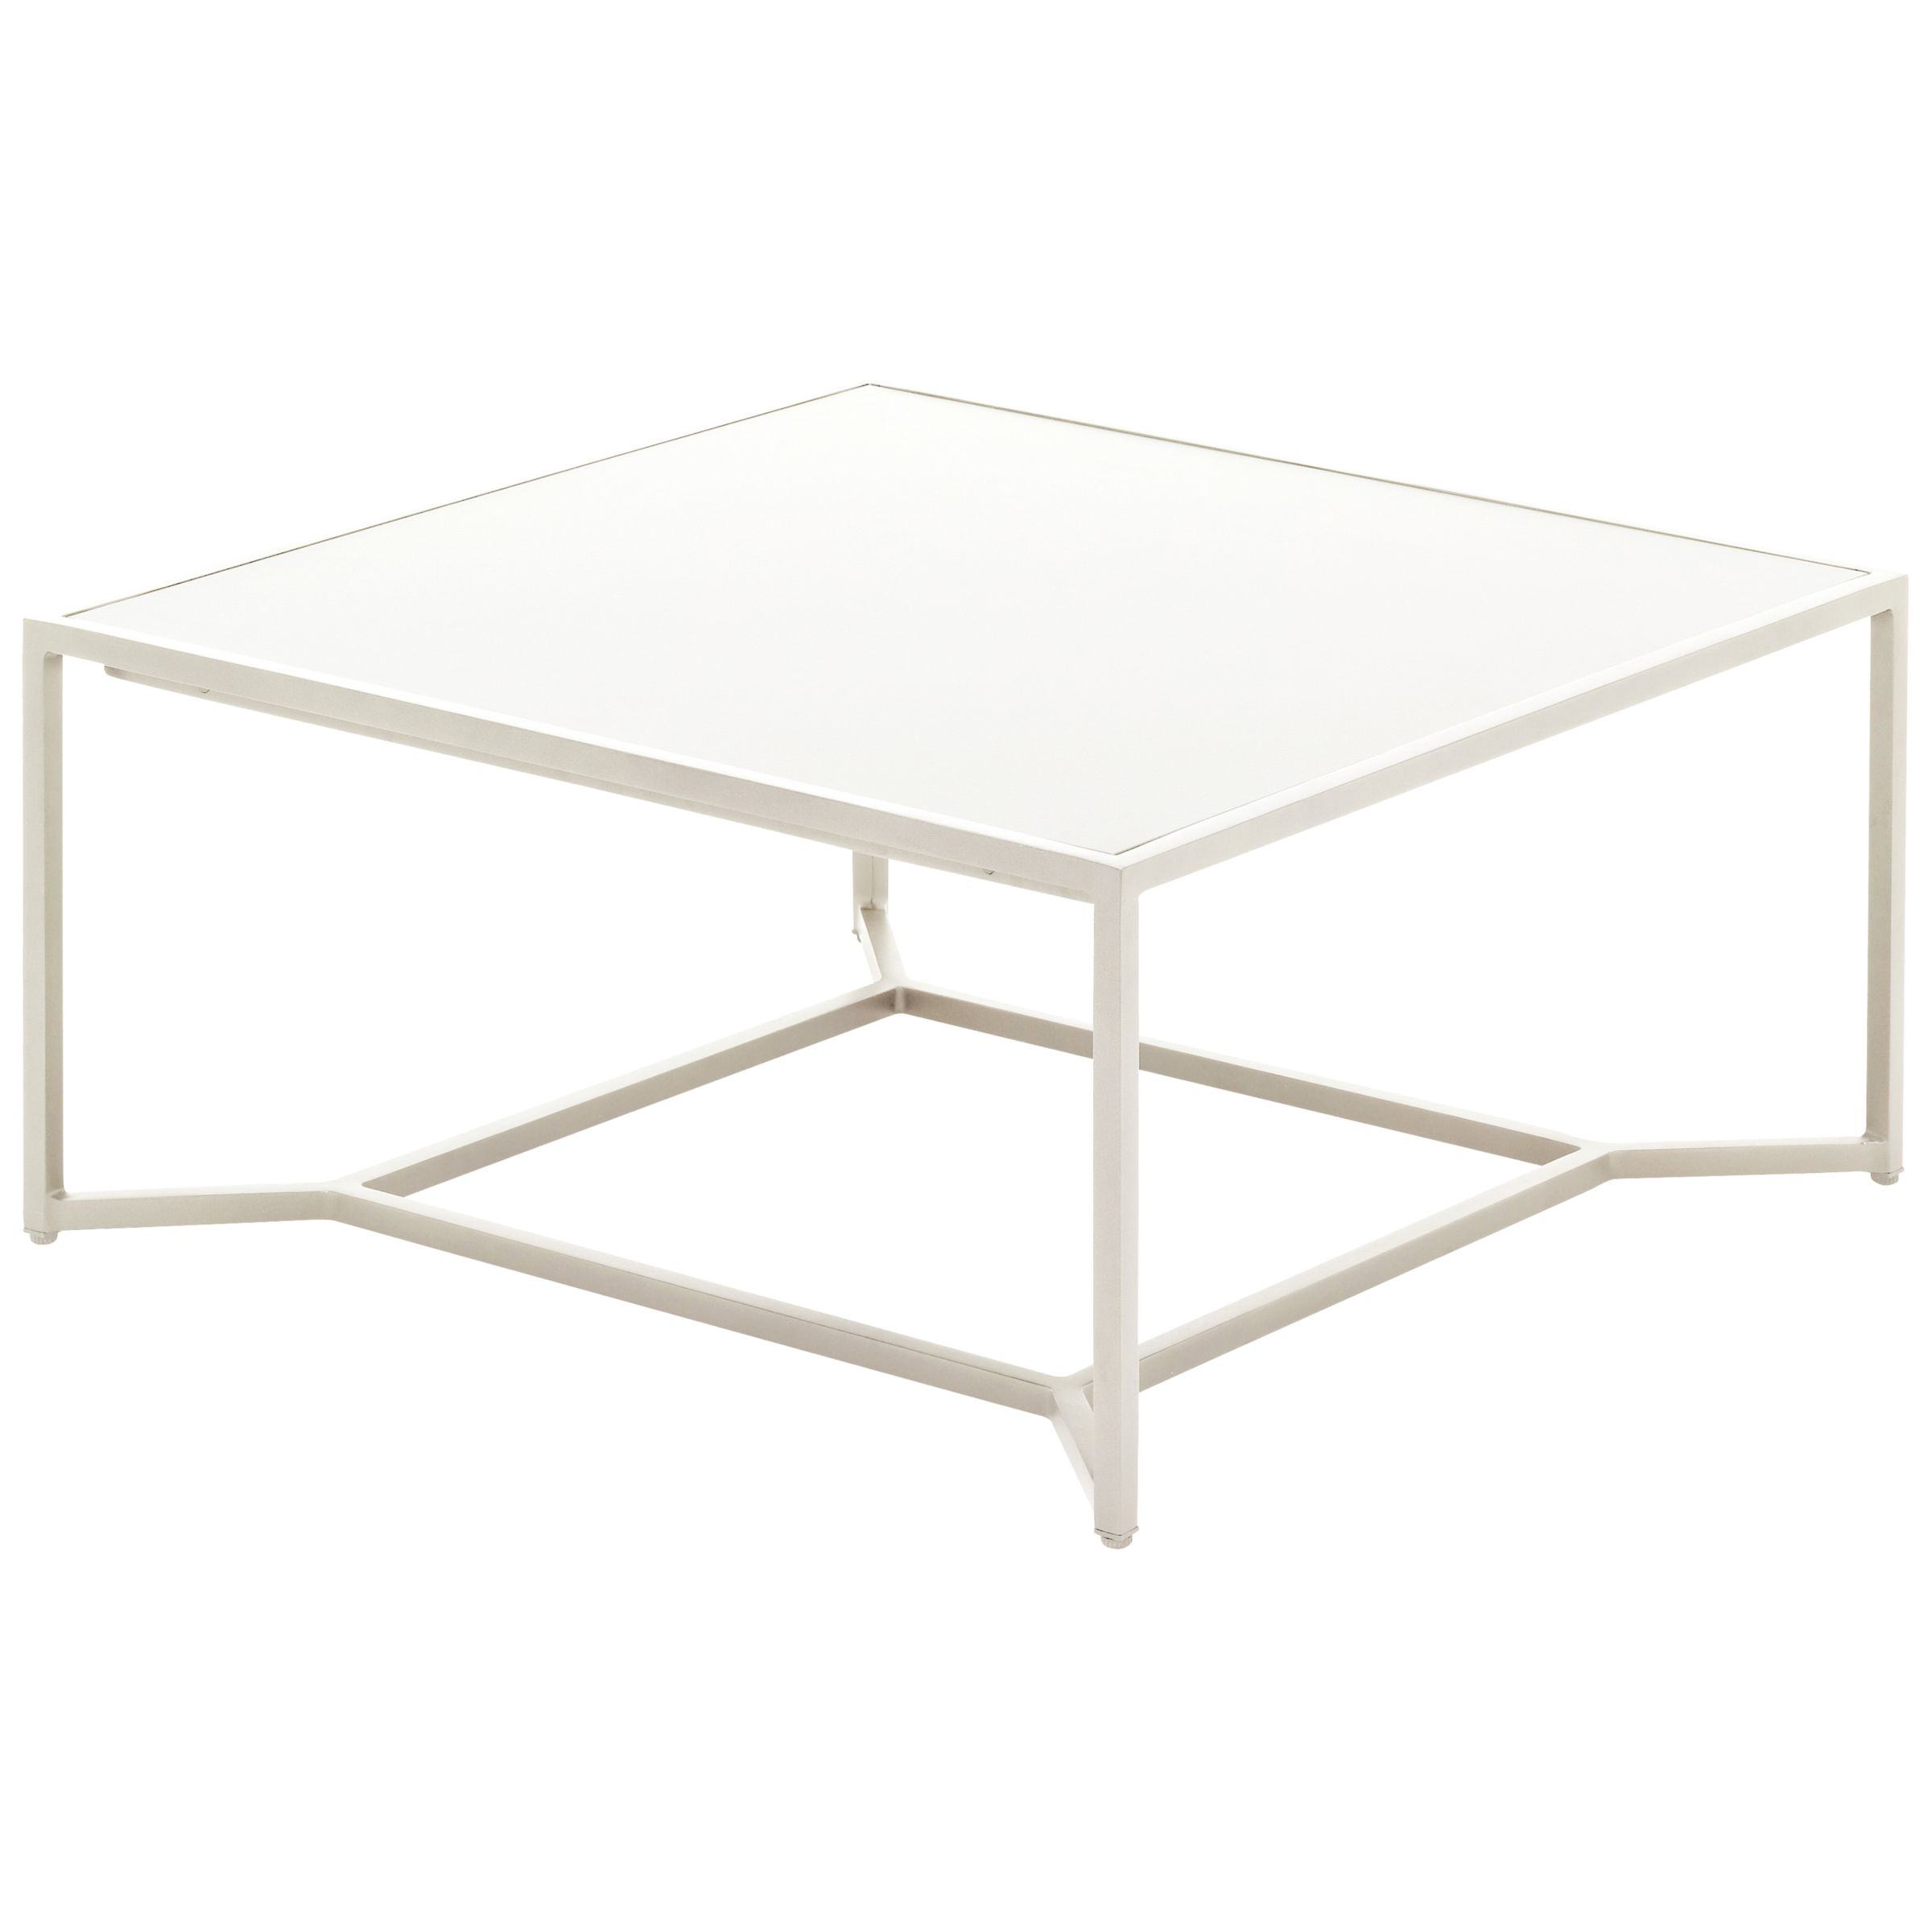 Gloster Bloc High Outdoor Coffee Table, White